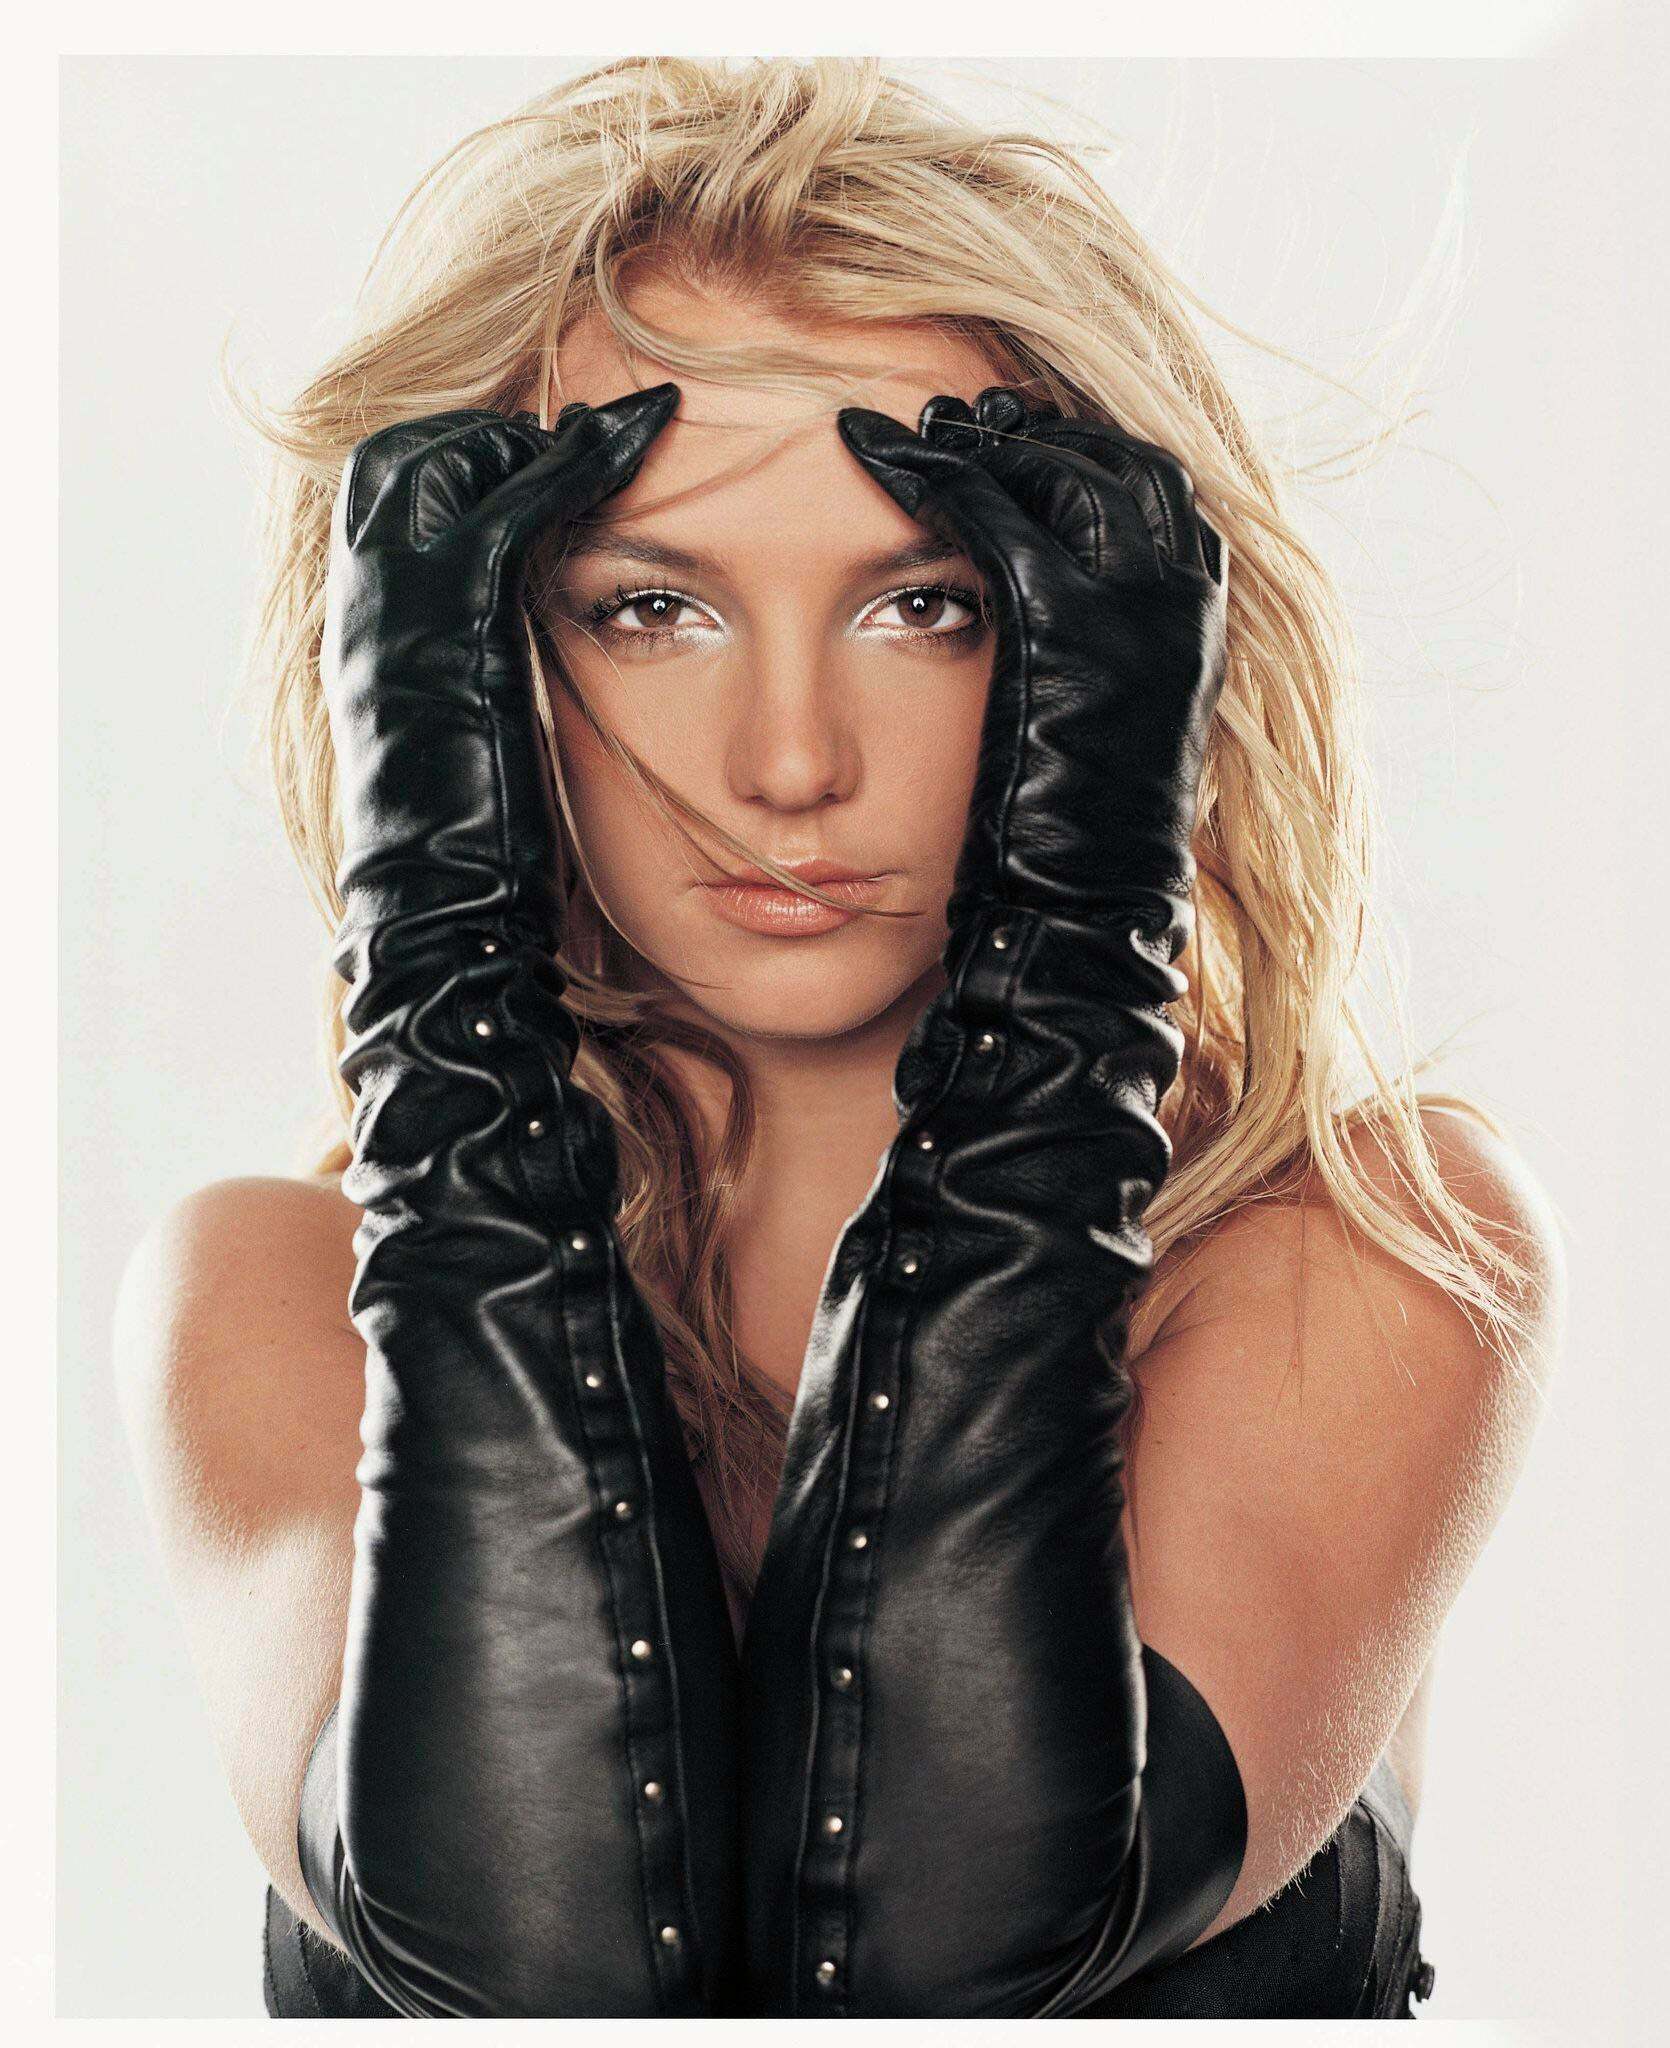 Britney Spears wears her long black leather gloves to jerk a lucky man off, any takers?